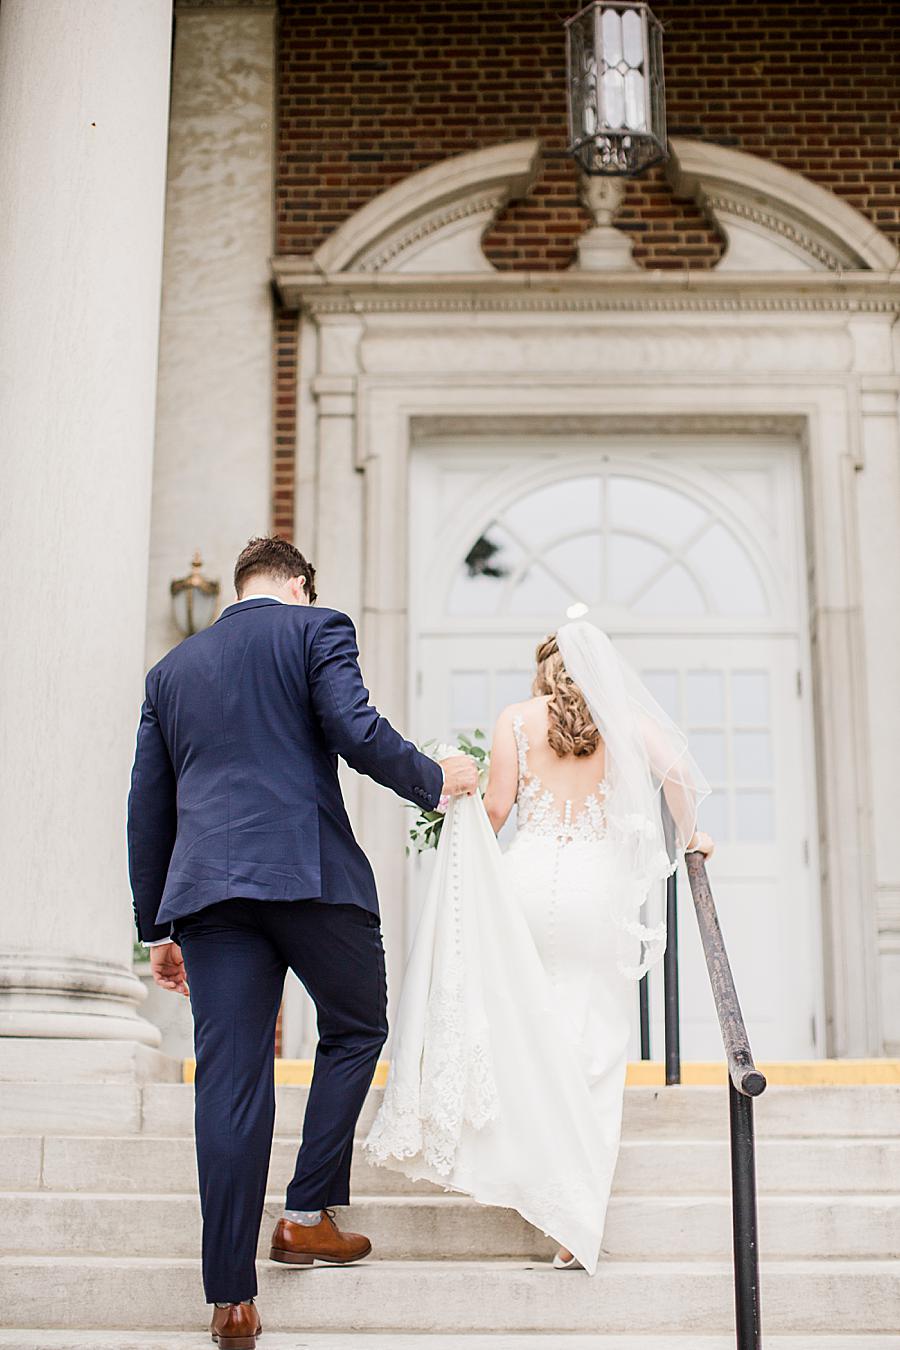 Bride and groom walking up the stairs by Knoxville Wedding Photographer, Amanda May Photos.